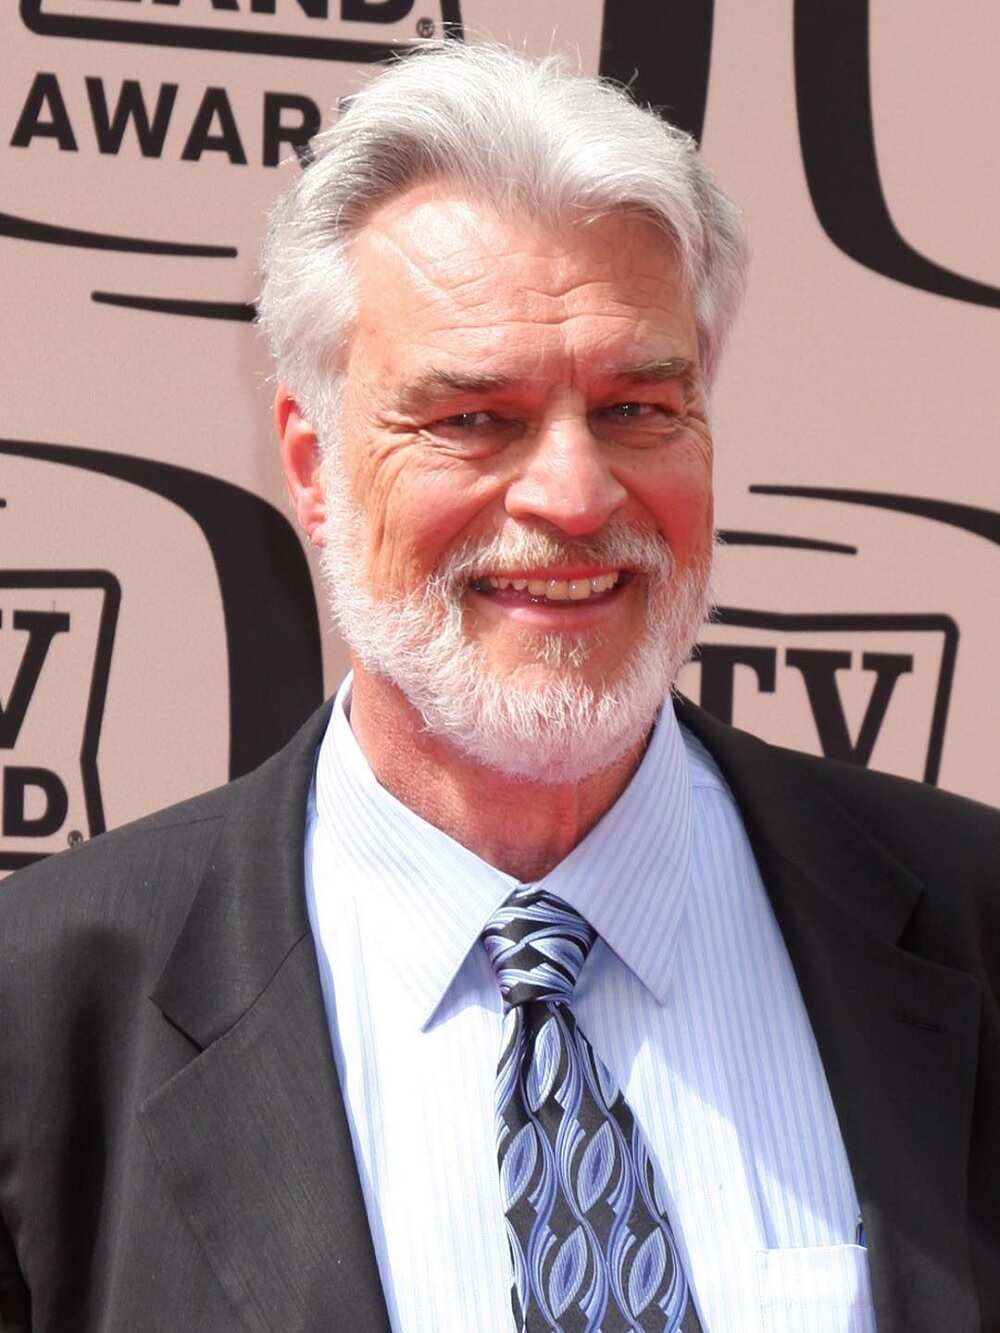 All the interesting facts about Richard Moll